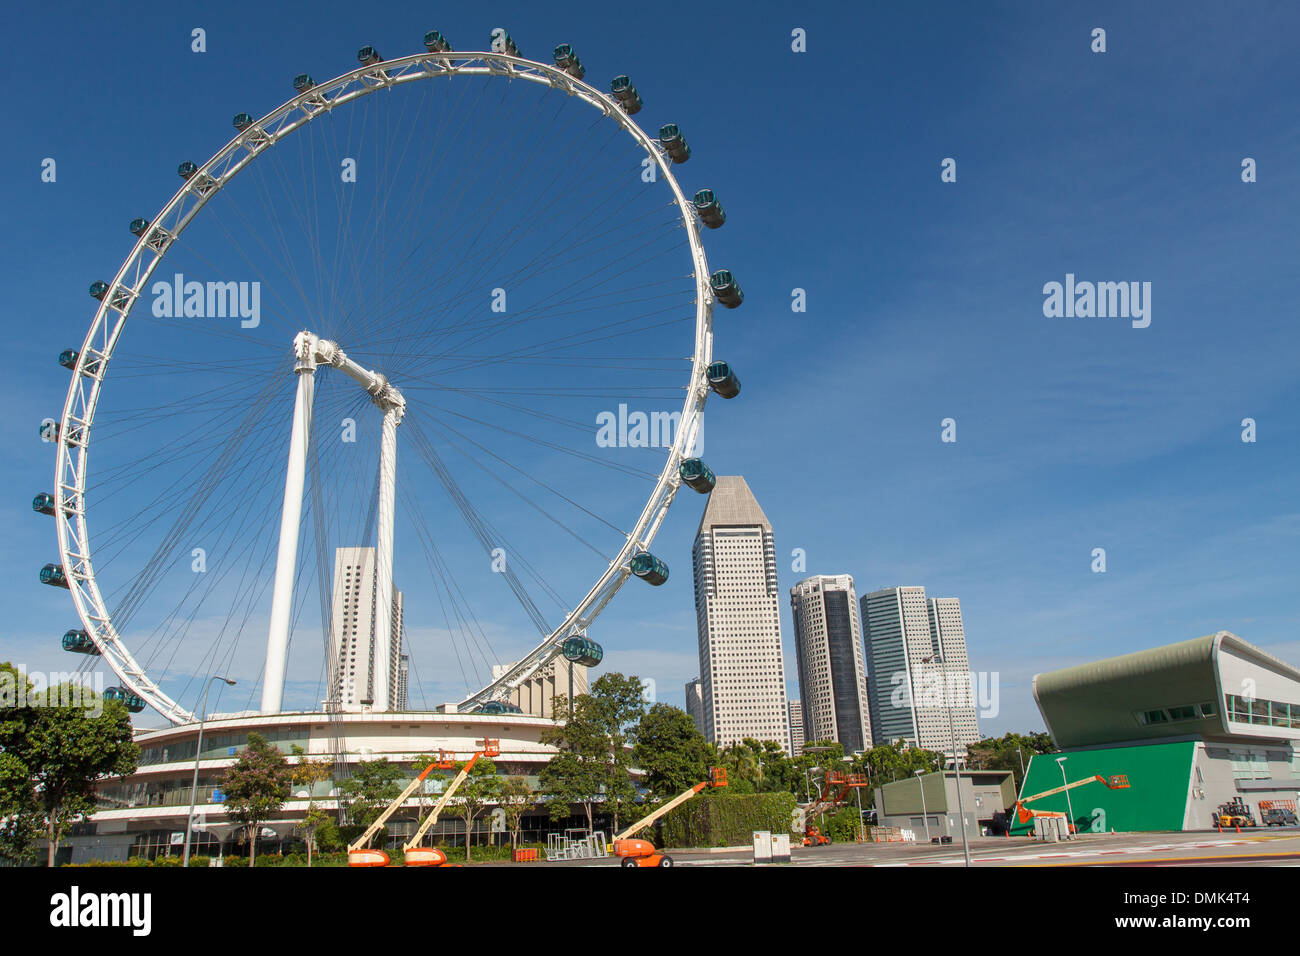 THE FERRIS WHEEL SINGAPORE FLYER WITH THE SKYSCRAPERS IN THE COLONIAL DISTRICT IN THE BACKGROUND, MARINA BAY, SINGAPORE Stock Photo